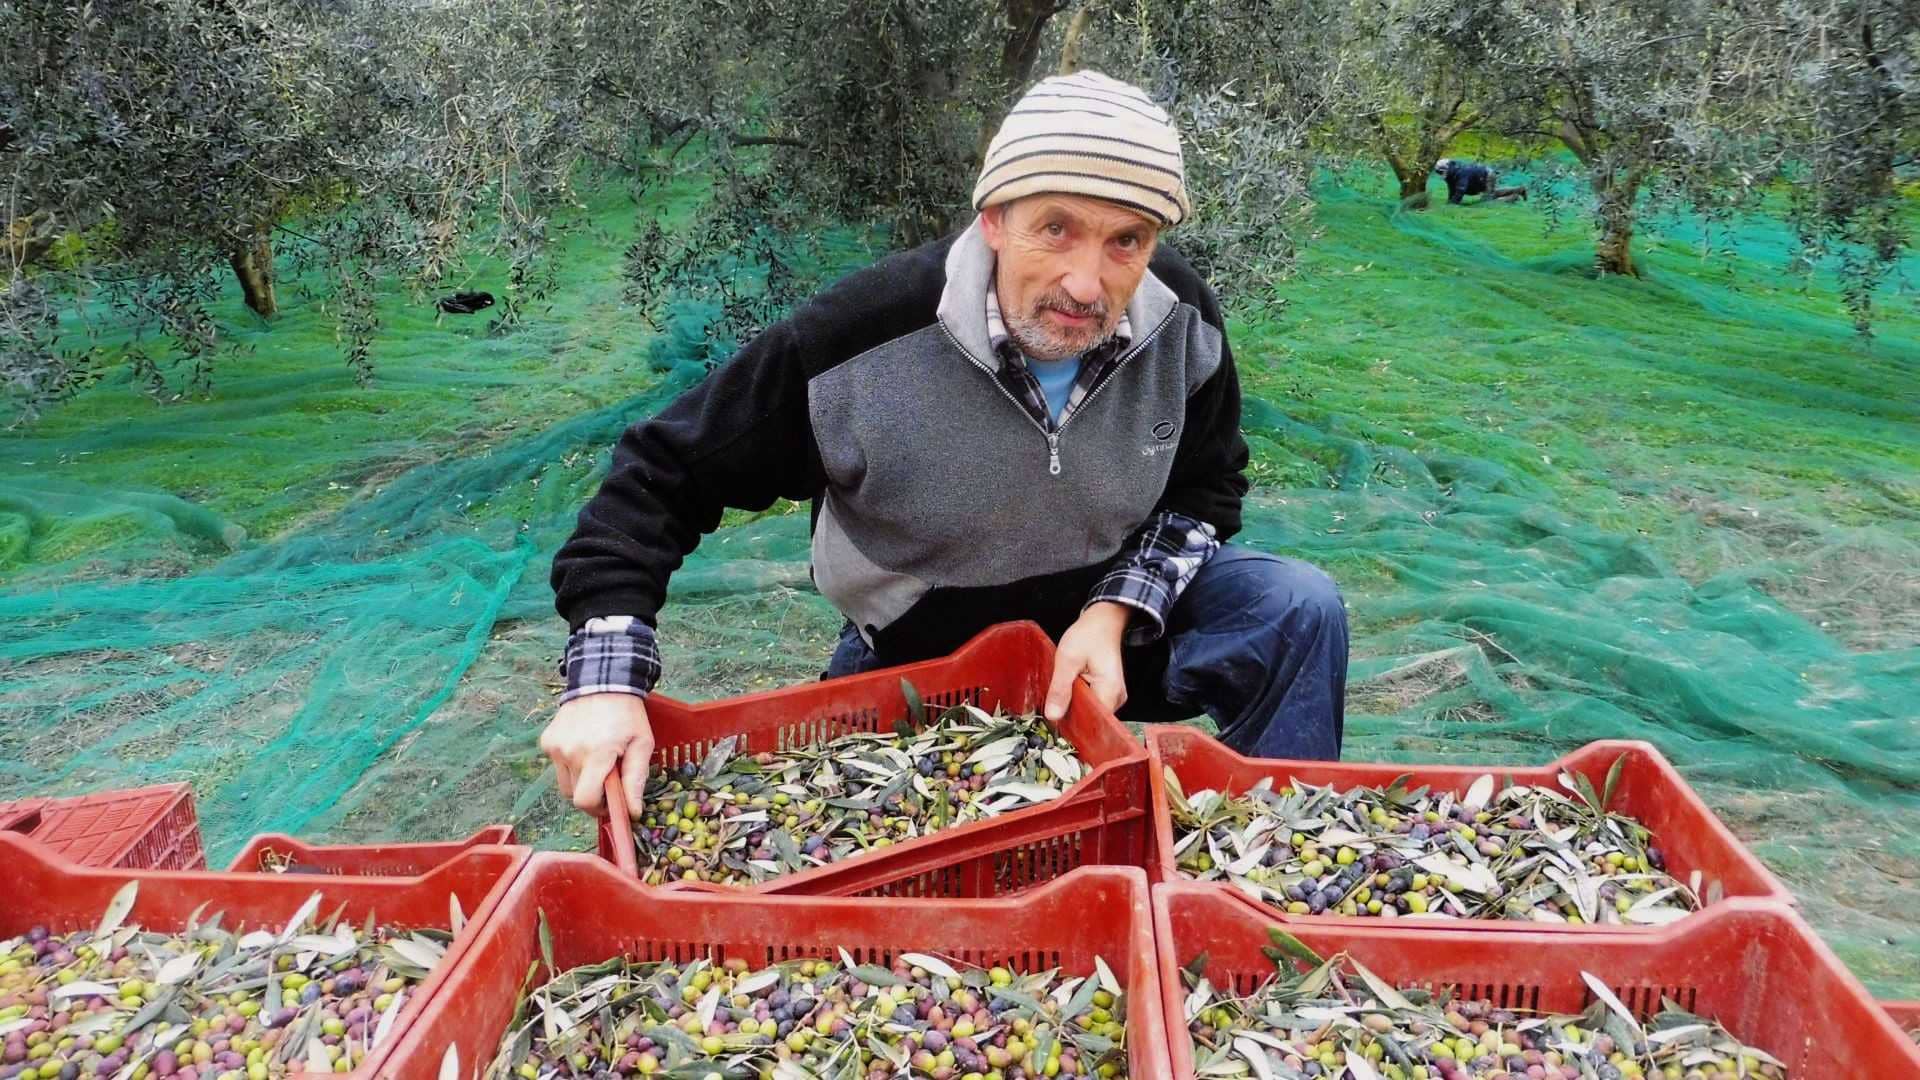 business-europe-production-production-rebounds-in-france-amid-climatic-challenges-olive-oil-times